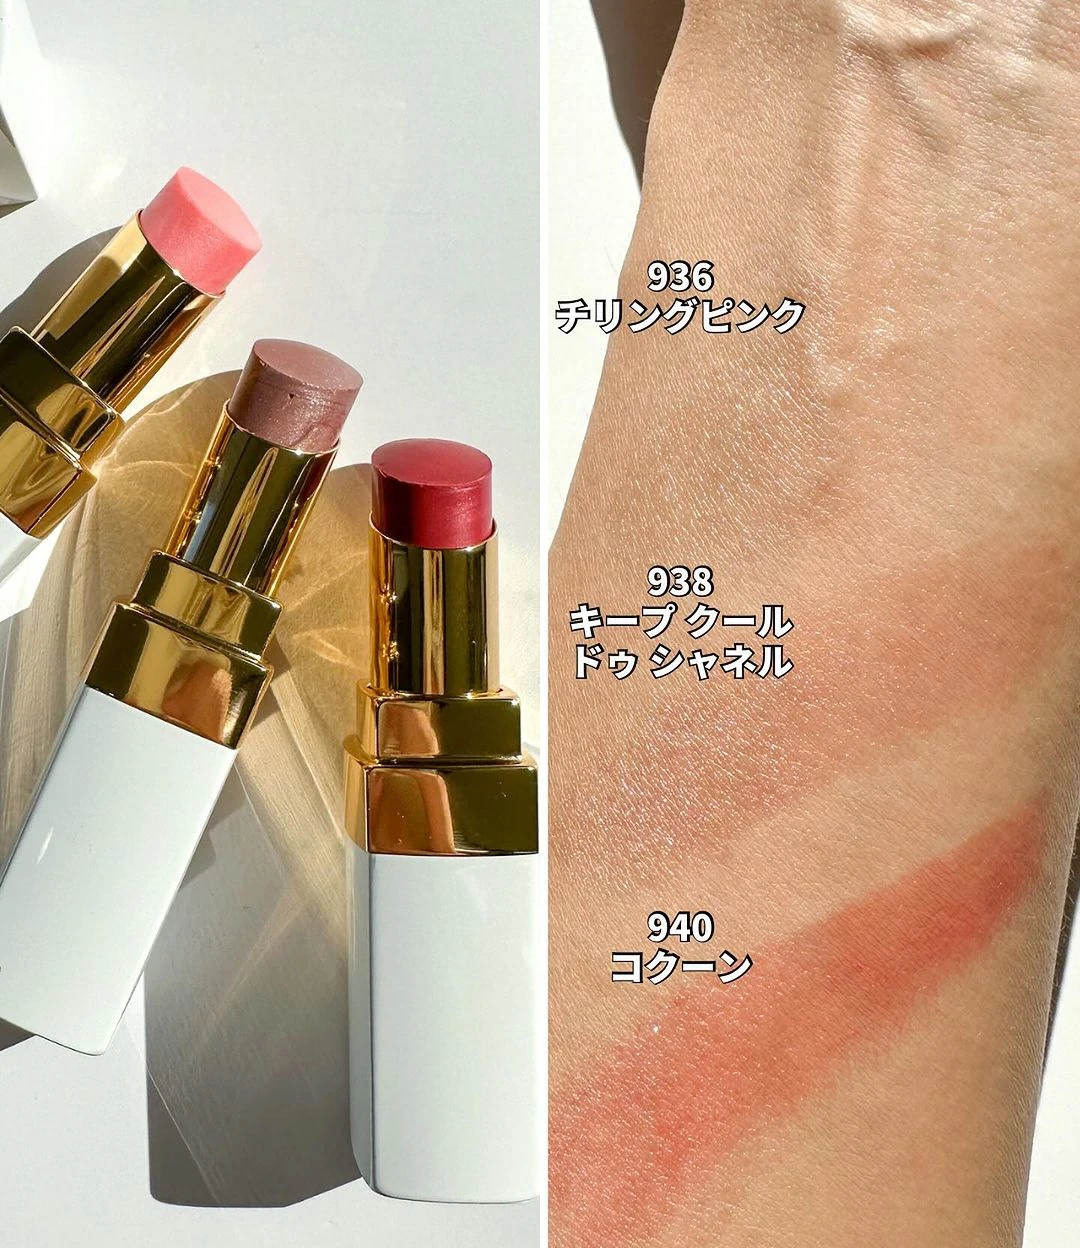 chanel-les-beiges-winter-glow-Rouge-Coco-Baume-swatches